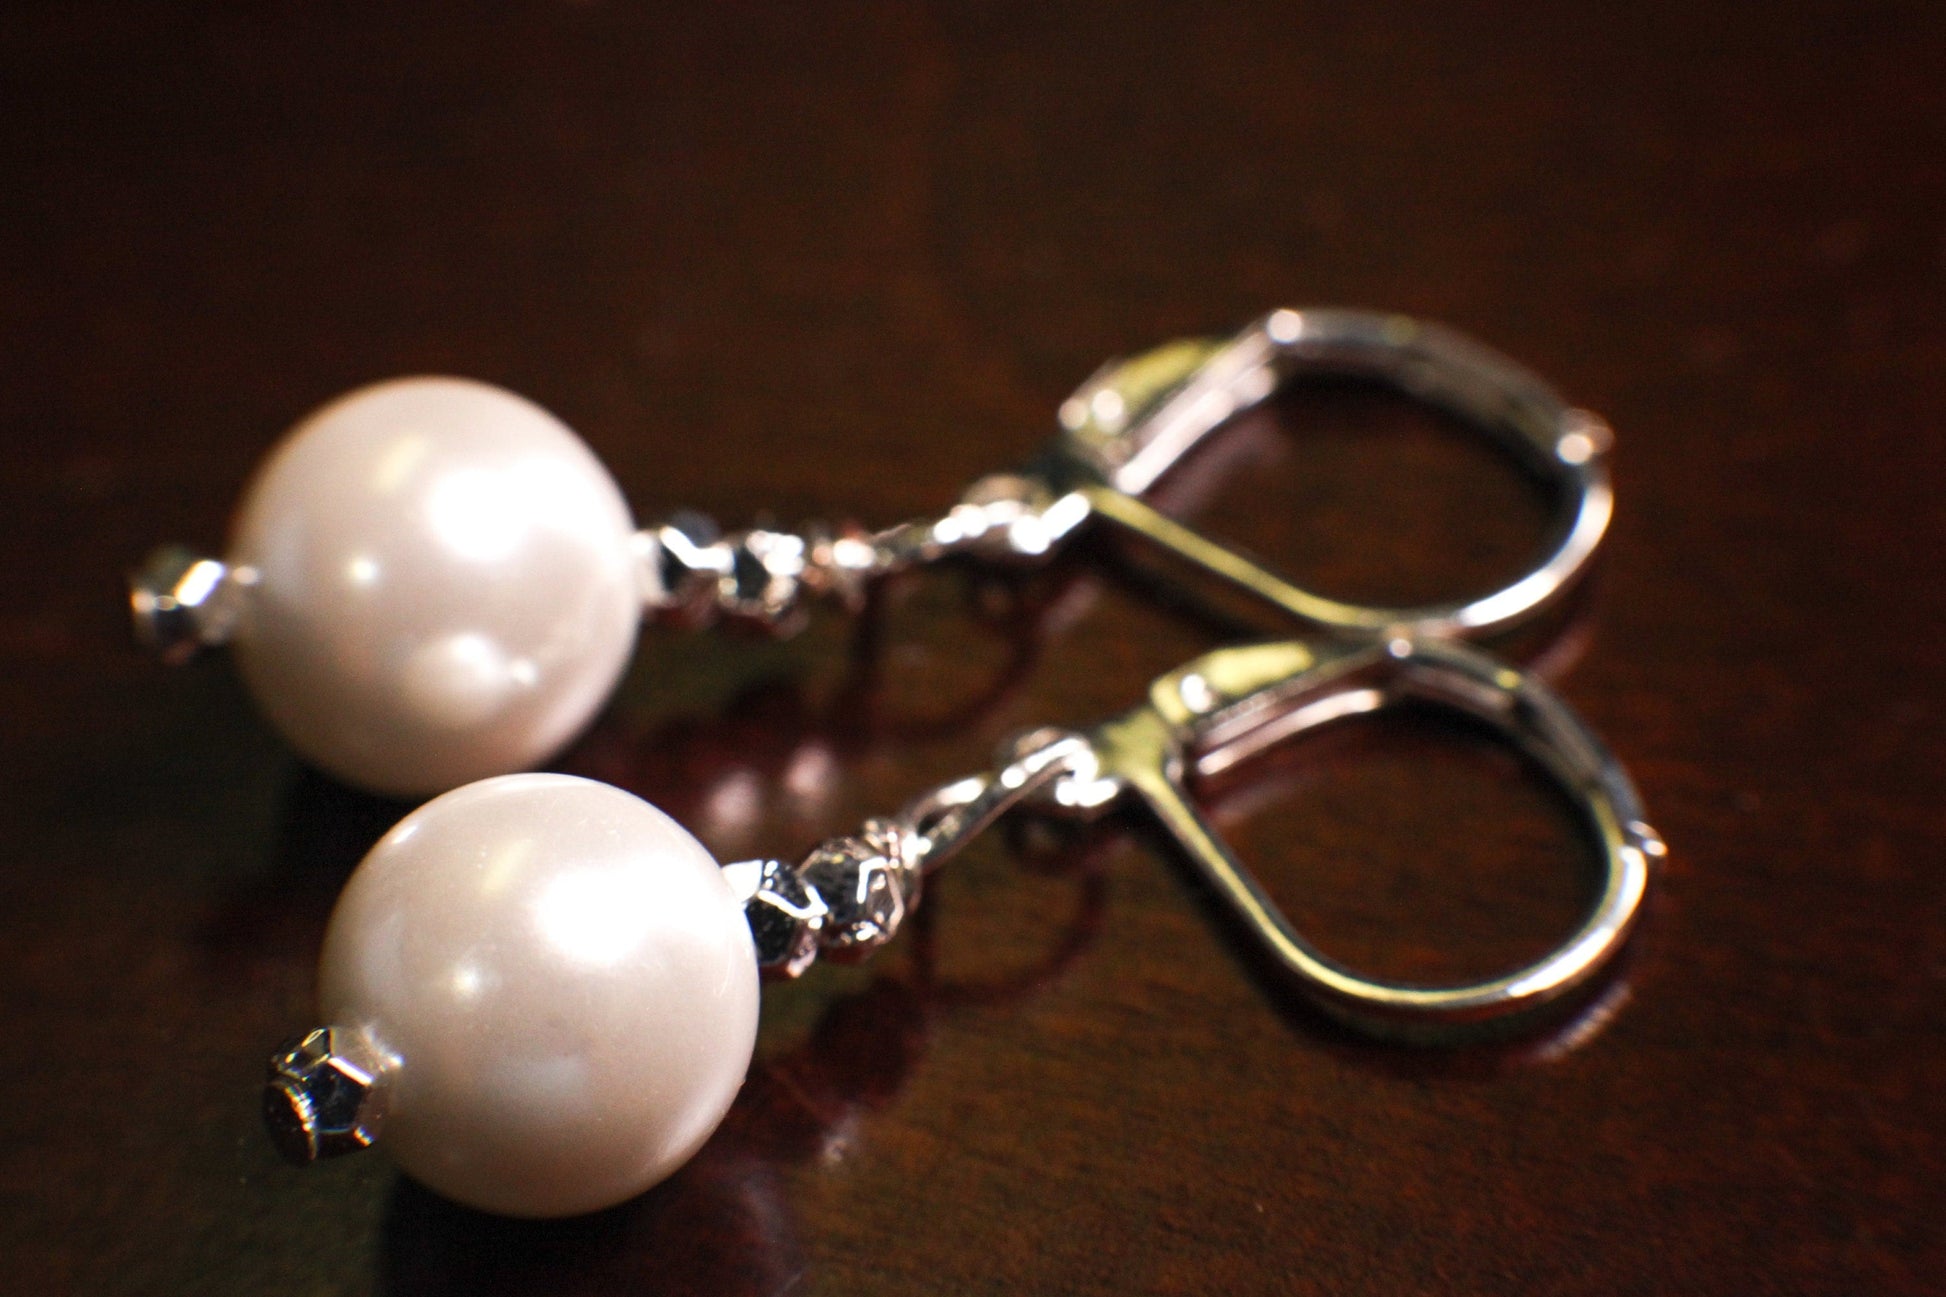 White South SeaShell Pearl 10mm round silver Leverback Earrings, simple minimalist Bridal.